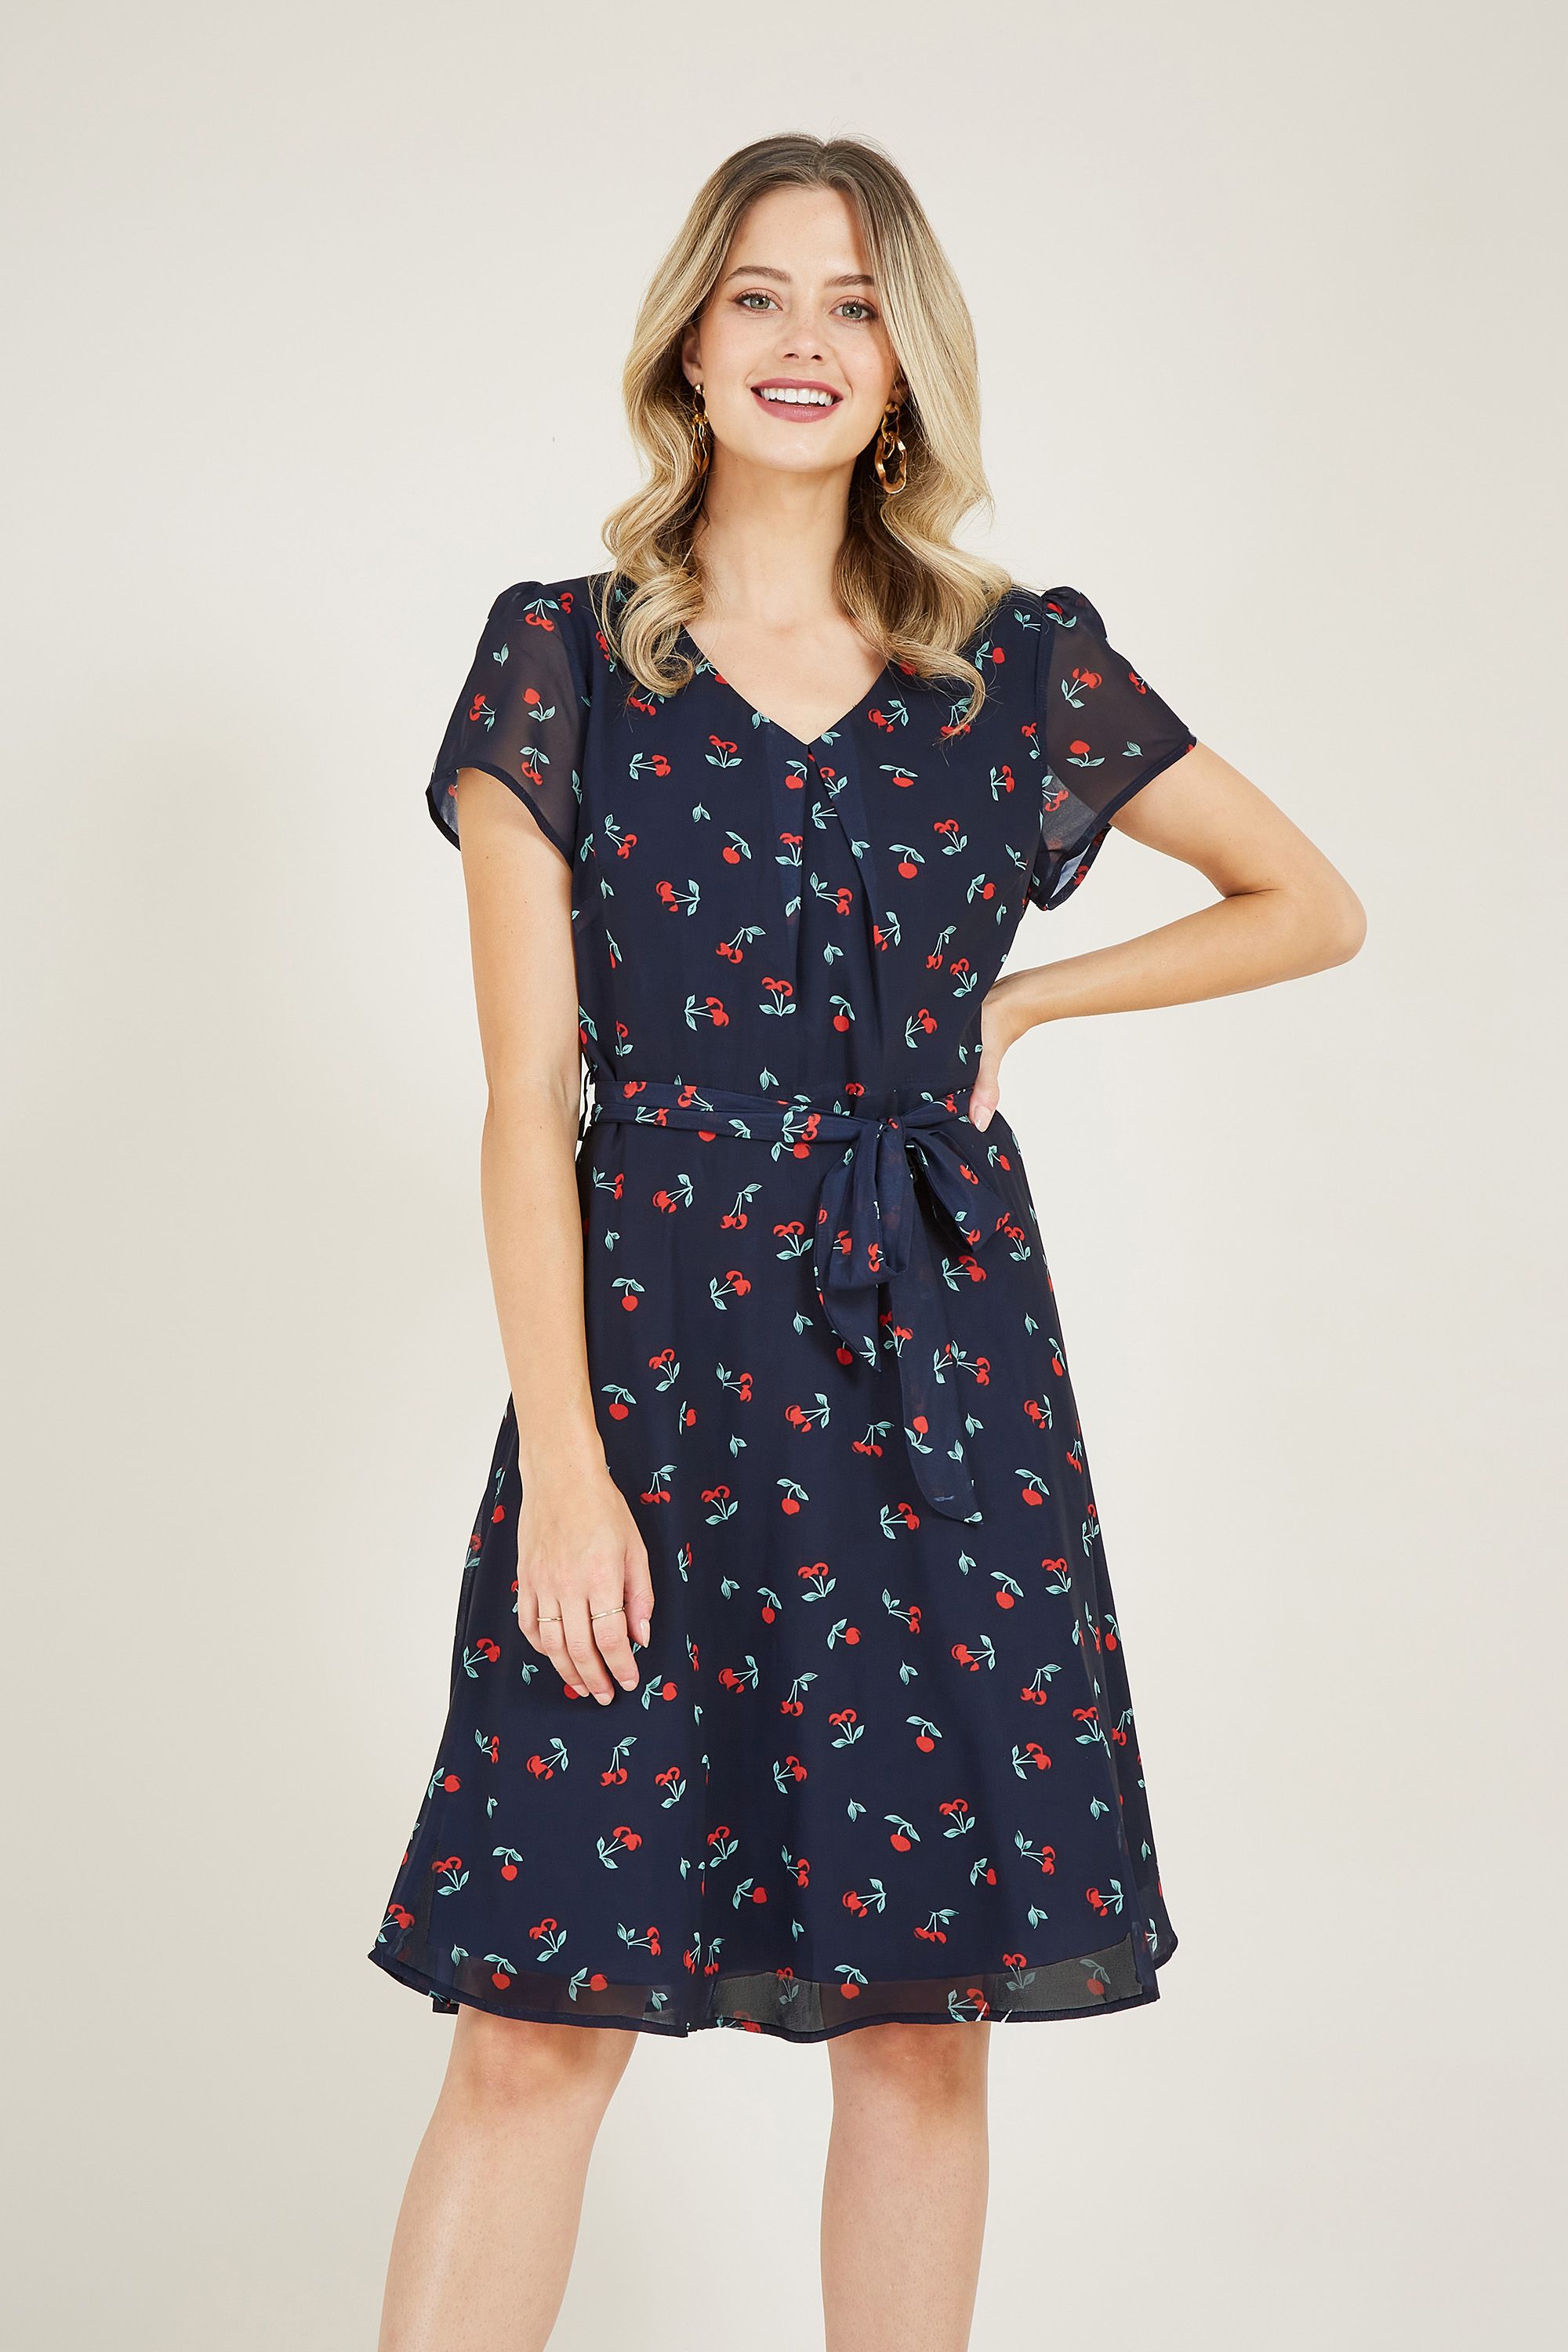 Fresh and fruity, this Cherry Skater Dress is perfect for daytime to dinner. Expertly crafted from soft-touch fabric, it's detailed with a sweet print enhanced by classic tones. The cherry on top of the cake? The intricate V-neckline and zip fastening on the back. Let it take centre stage in your casual wardrobe.